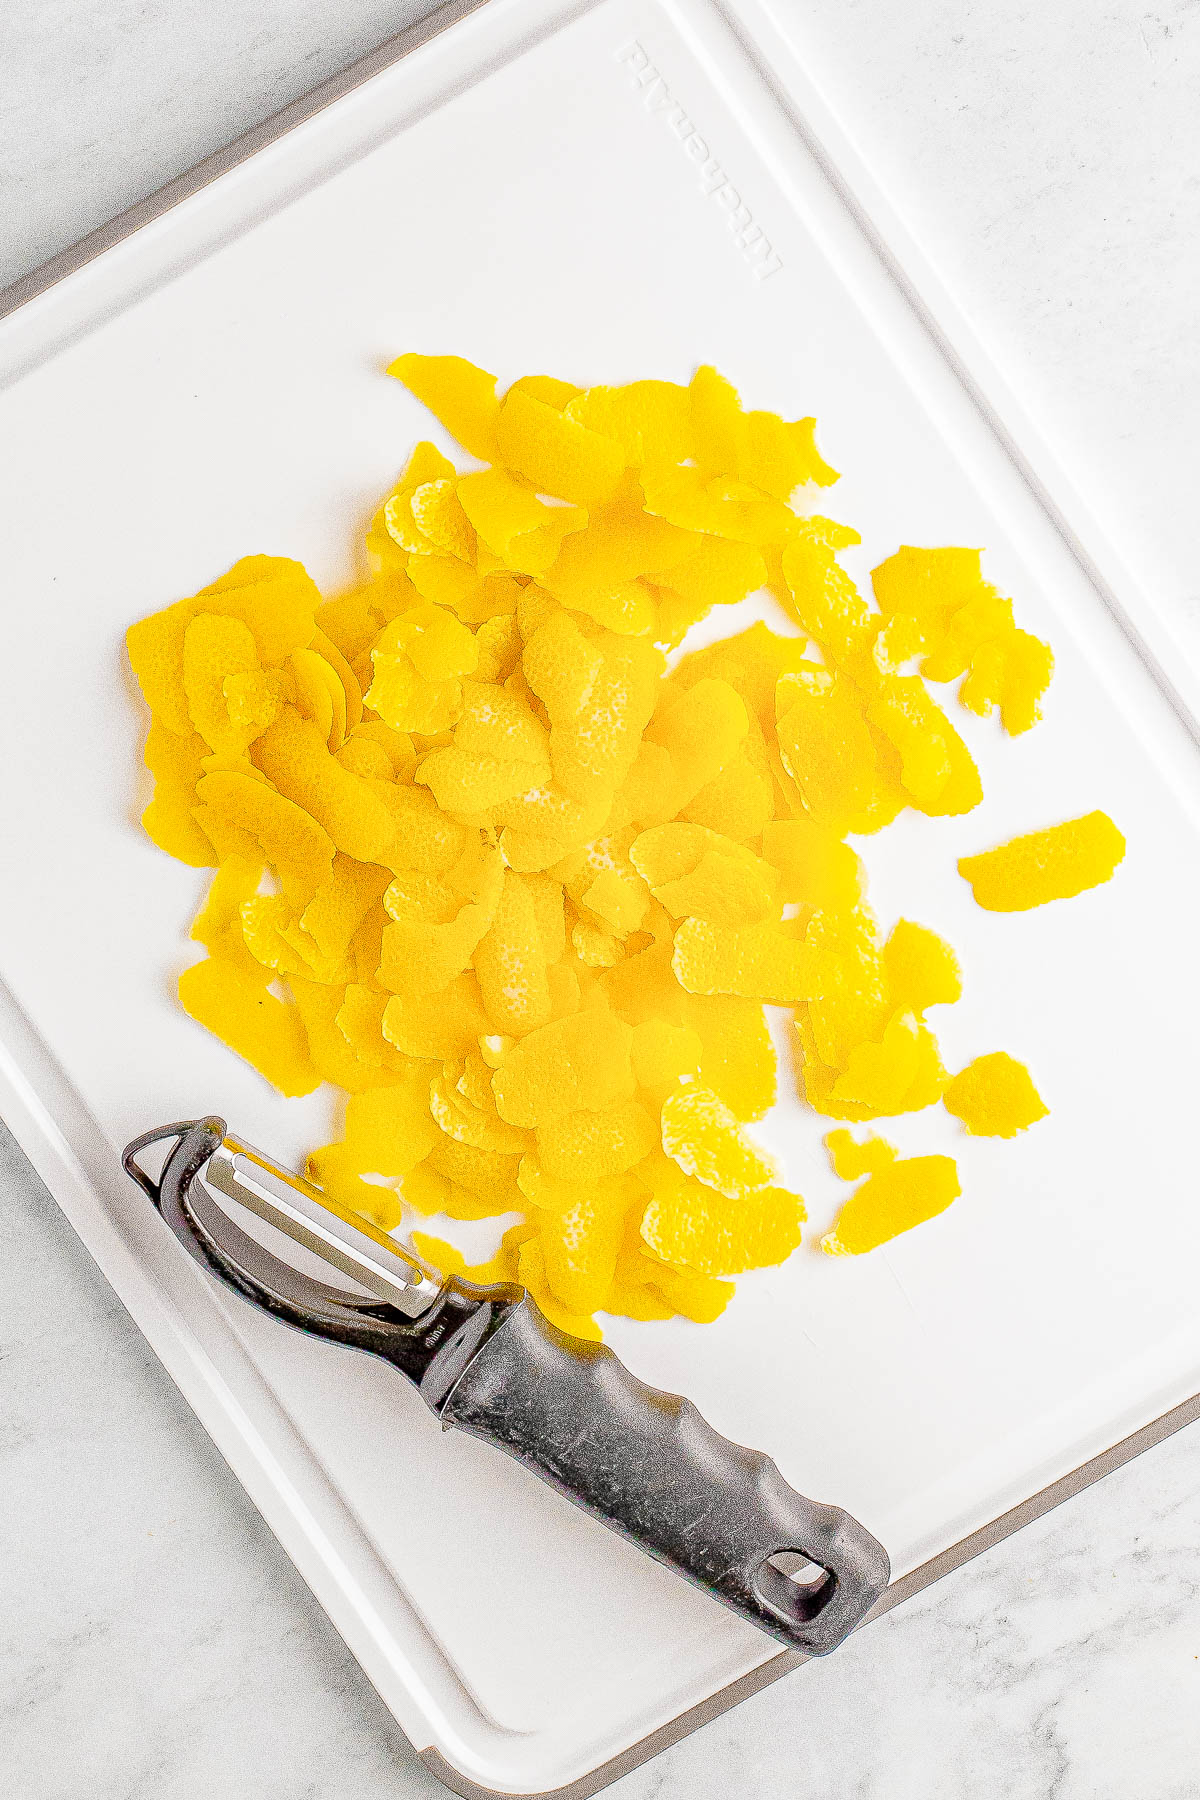 Lemon peels on a white cutting board with a metal peeler.